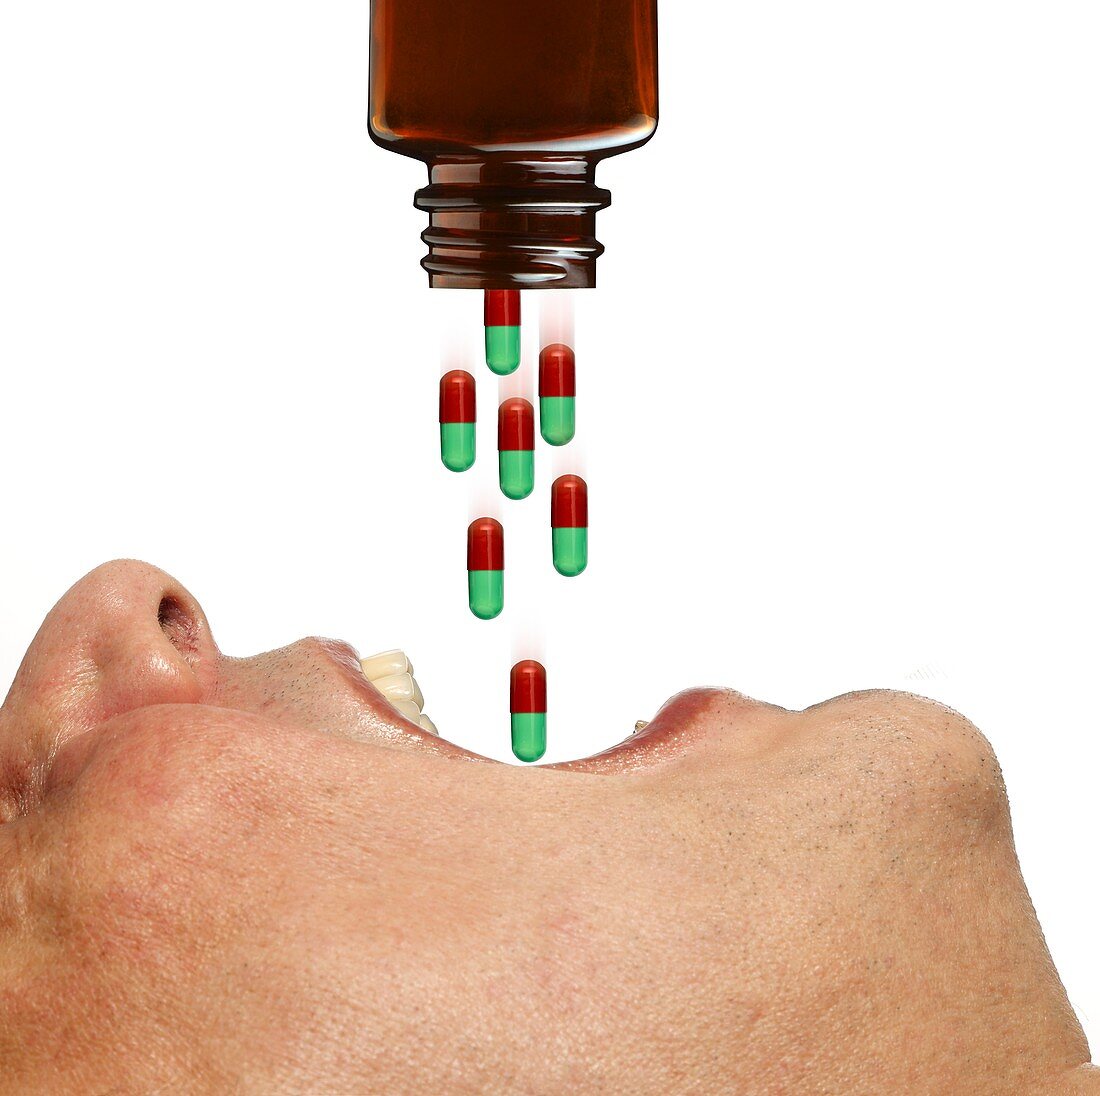 Person swallowing capsules, composite image